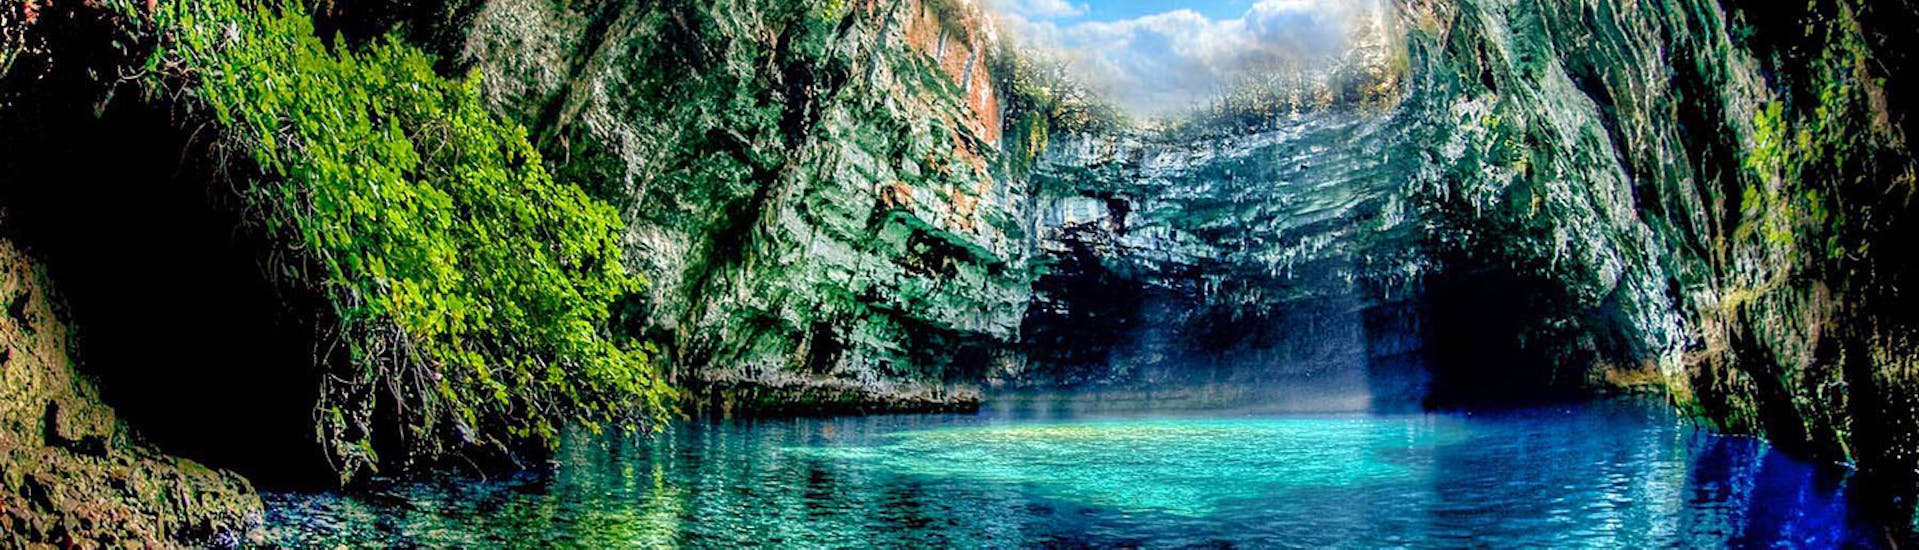 The beautiful Melissani cave with its lake and the open roof during the Boat & Bus Tour from Zakynthos to Kefalonia with Abba Tours Zante.